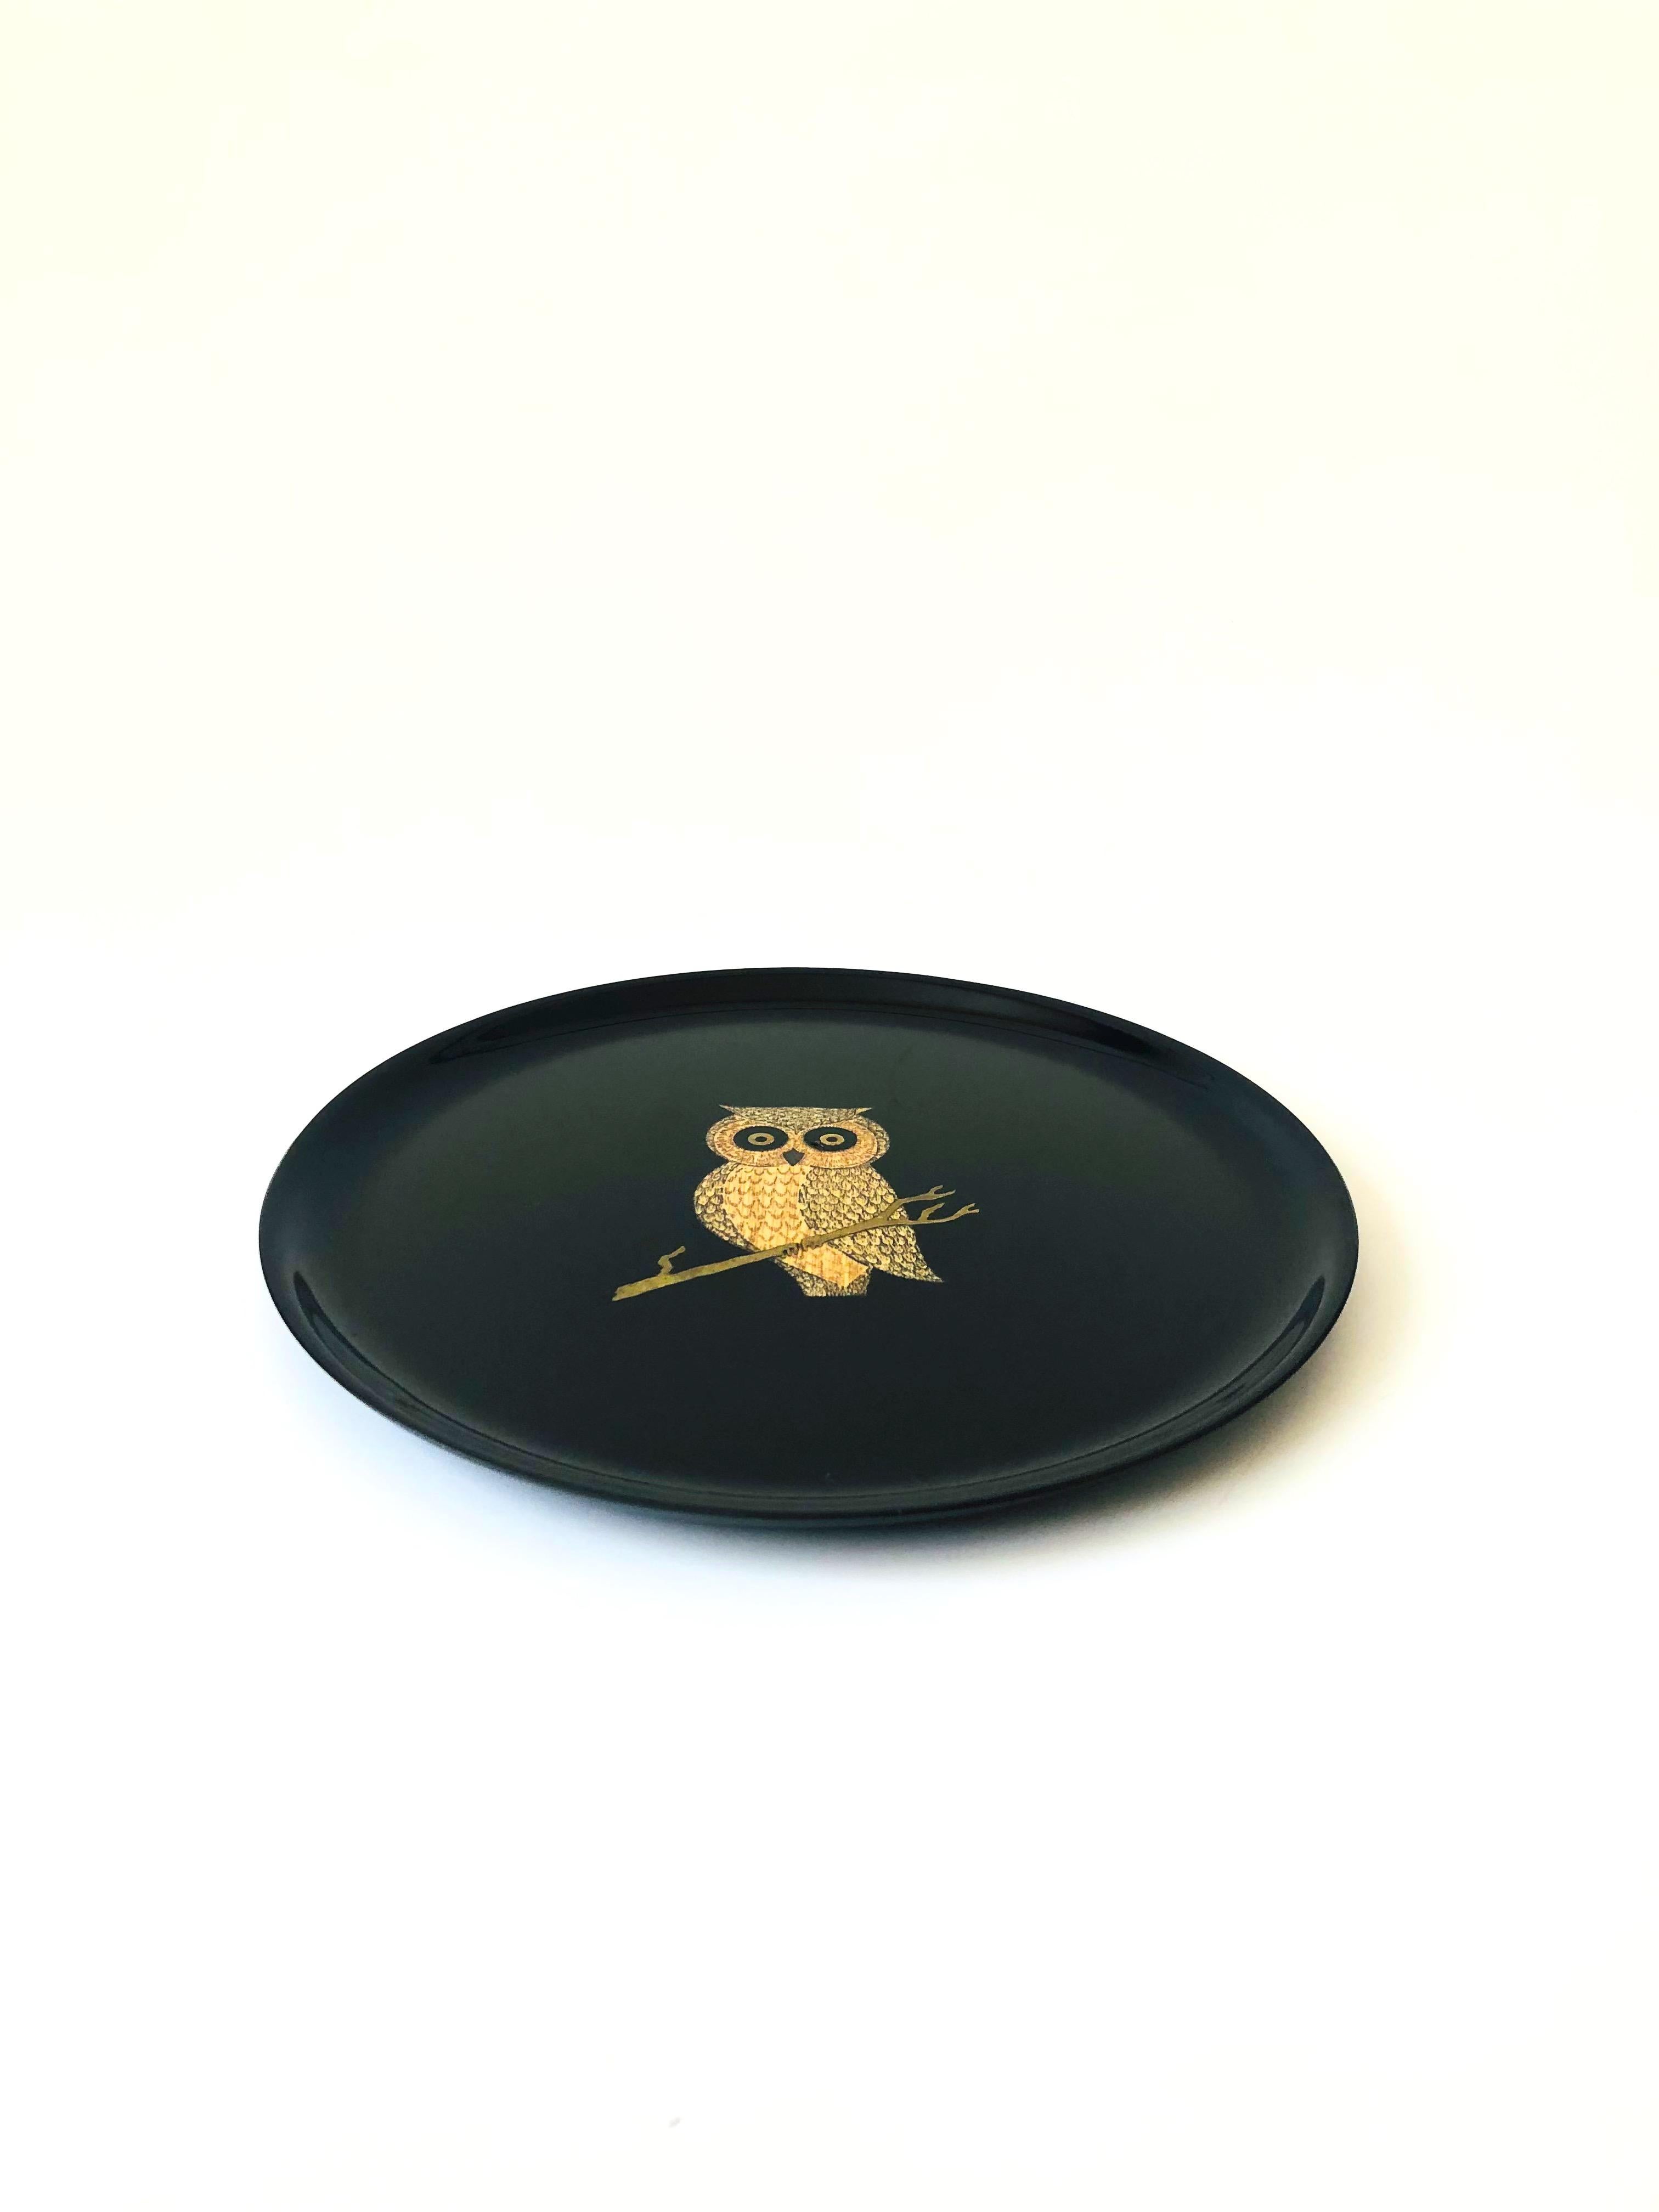 A wonderful vintage circular tray. The image of an owl in the center of the dish is formed from small pieces of inlaid shells, coins, woods, and metals fused into a satin black durable plastic-like material called phenolic. Made in Montery,